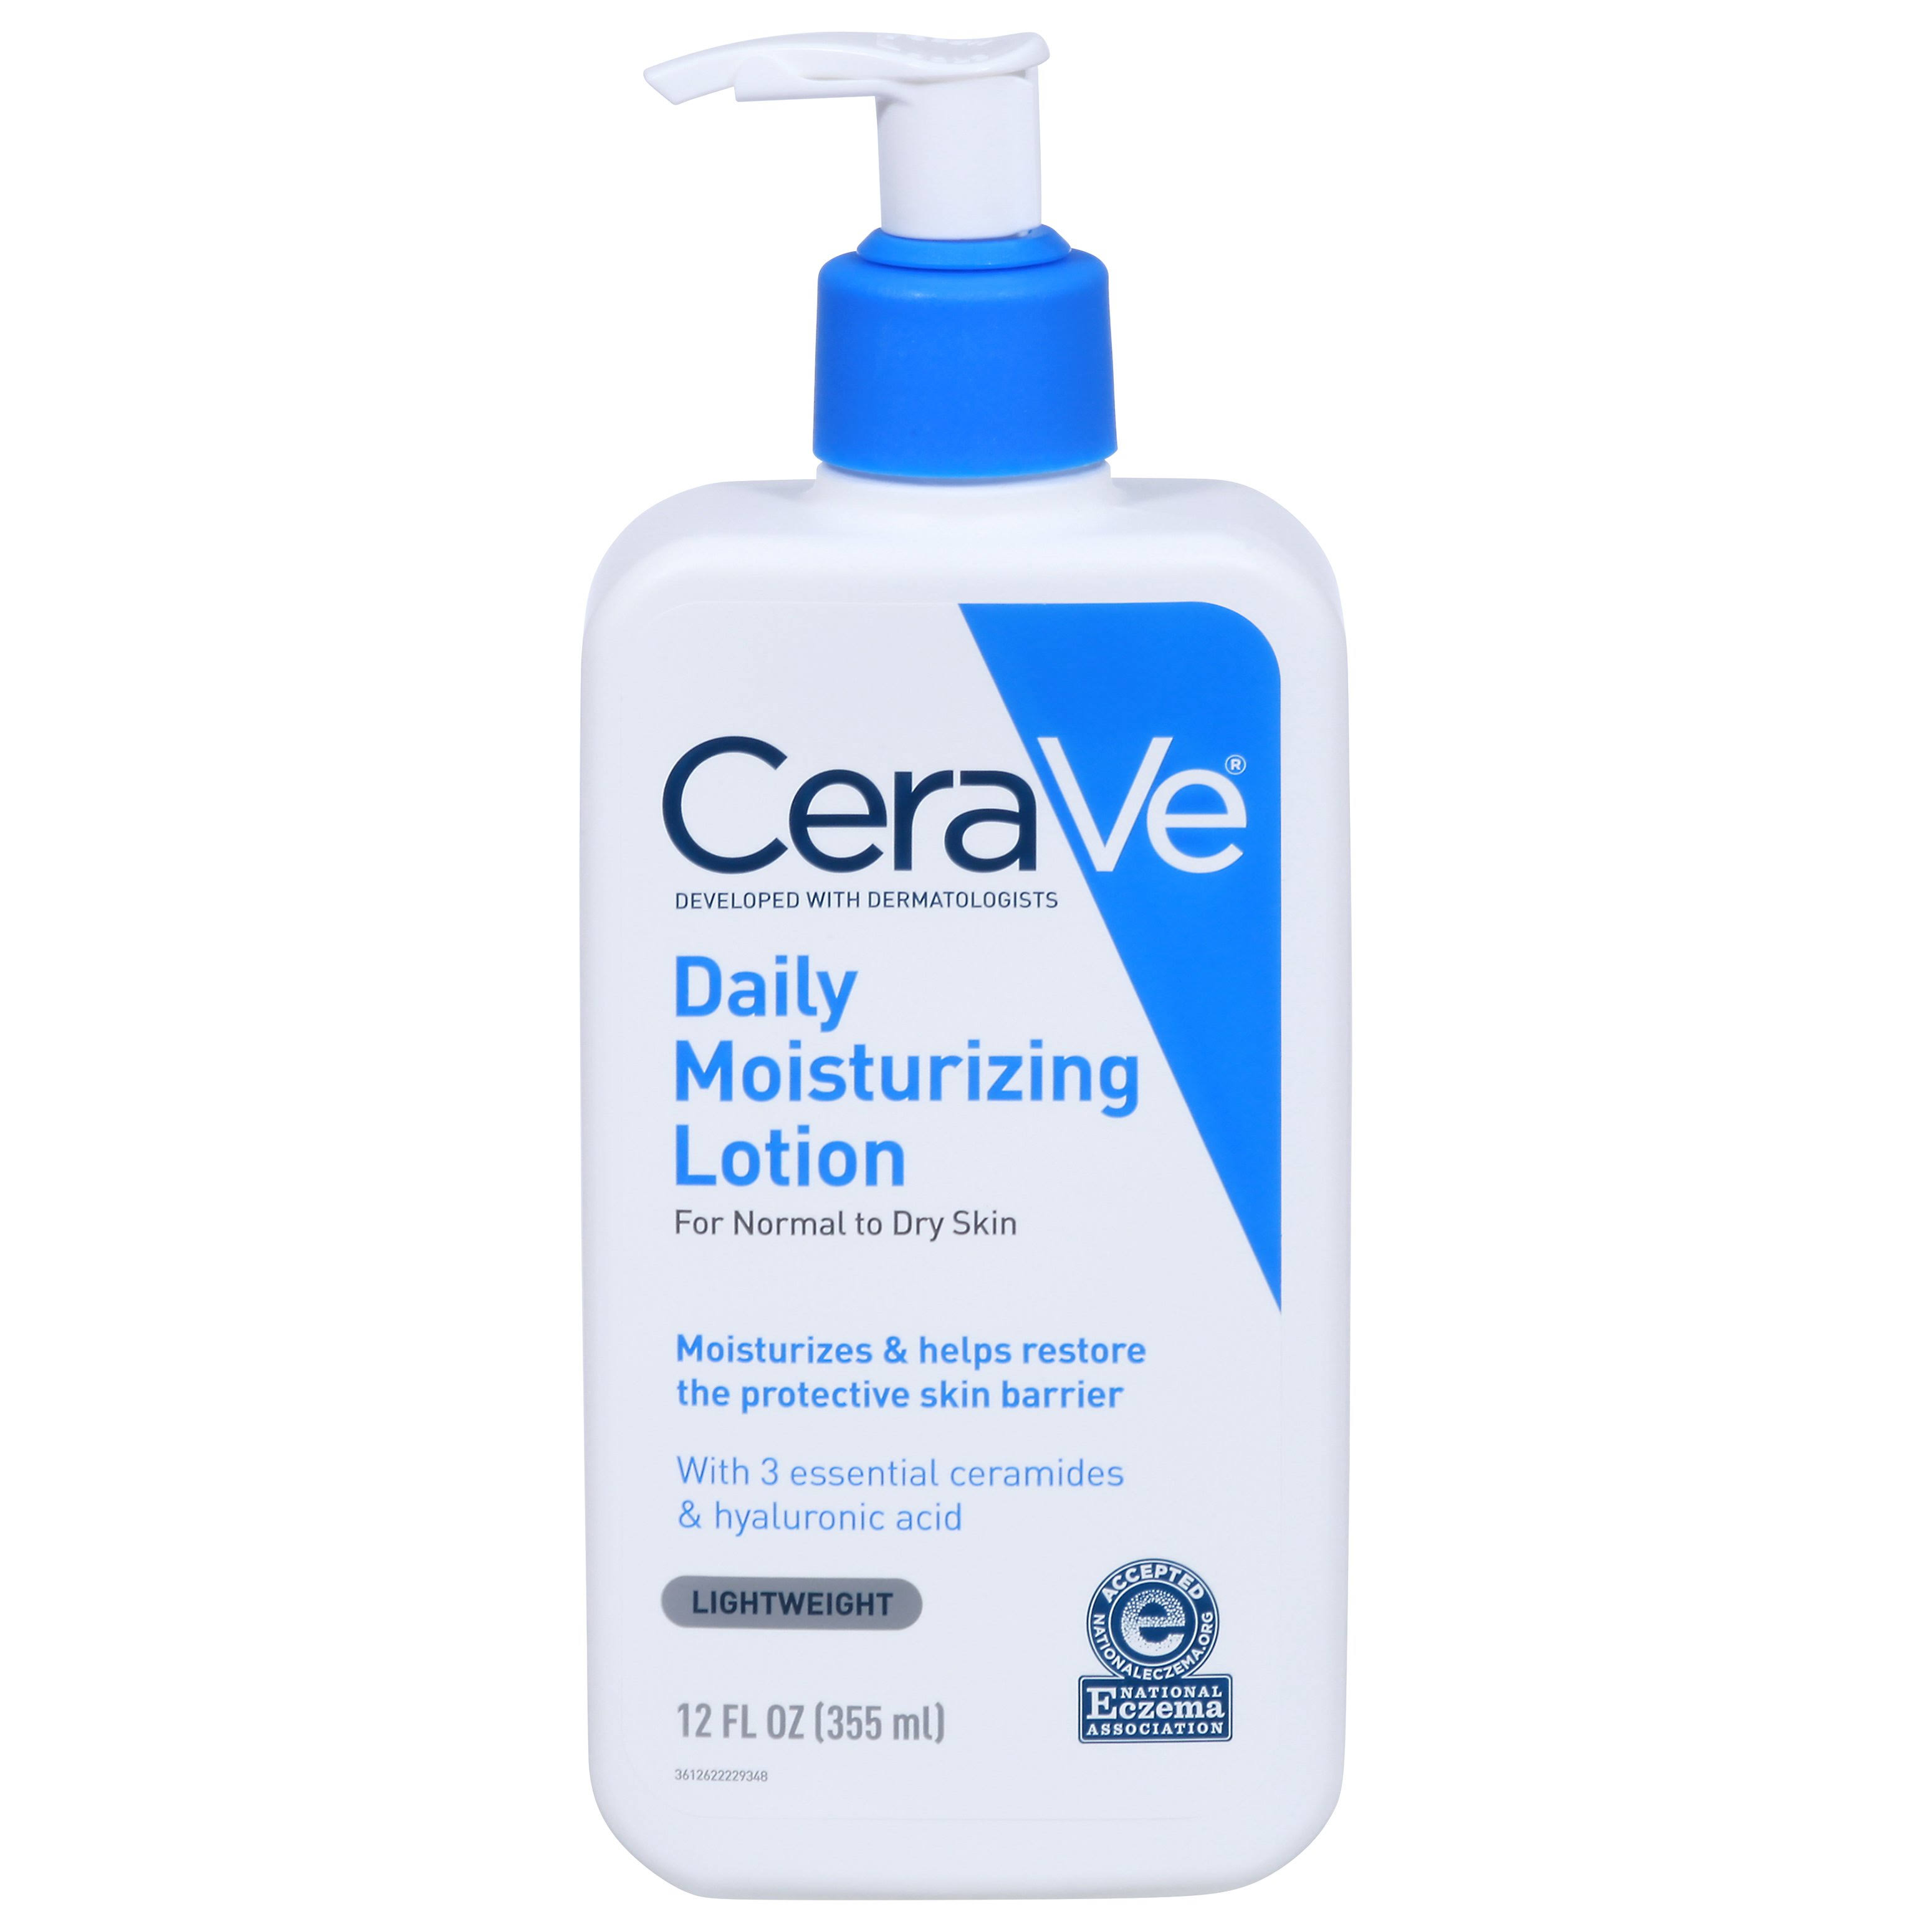 CeraVe Daily Moisturizing Lotion - for Normal to Dry Skin, 12oz